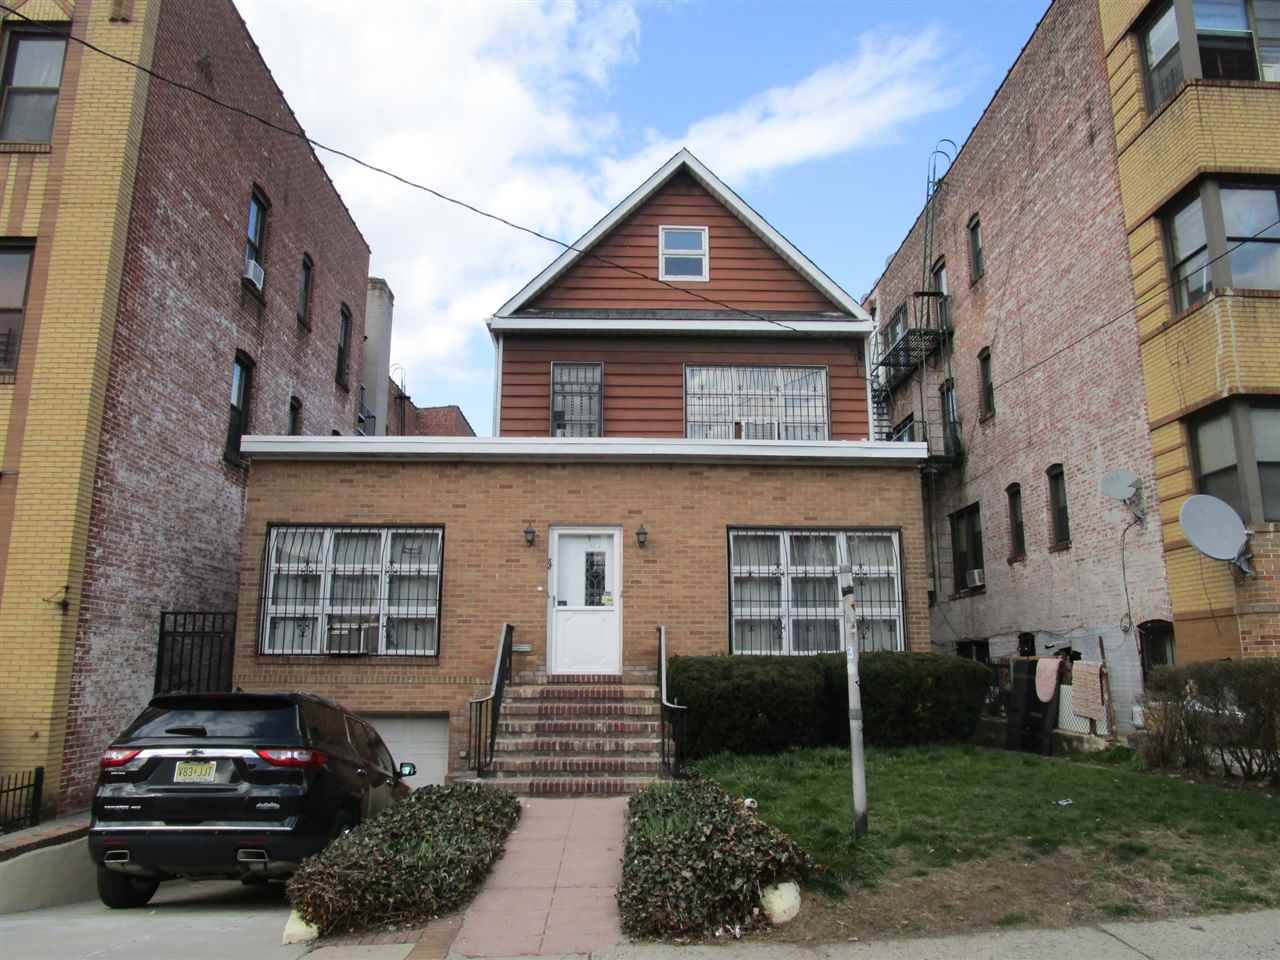 Large 37 - 5 BR New Jersey